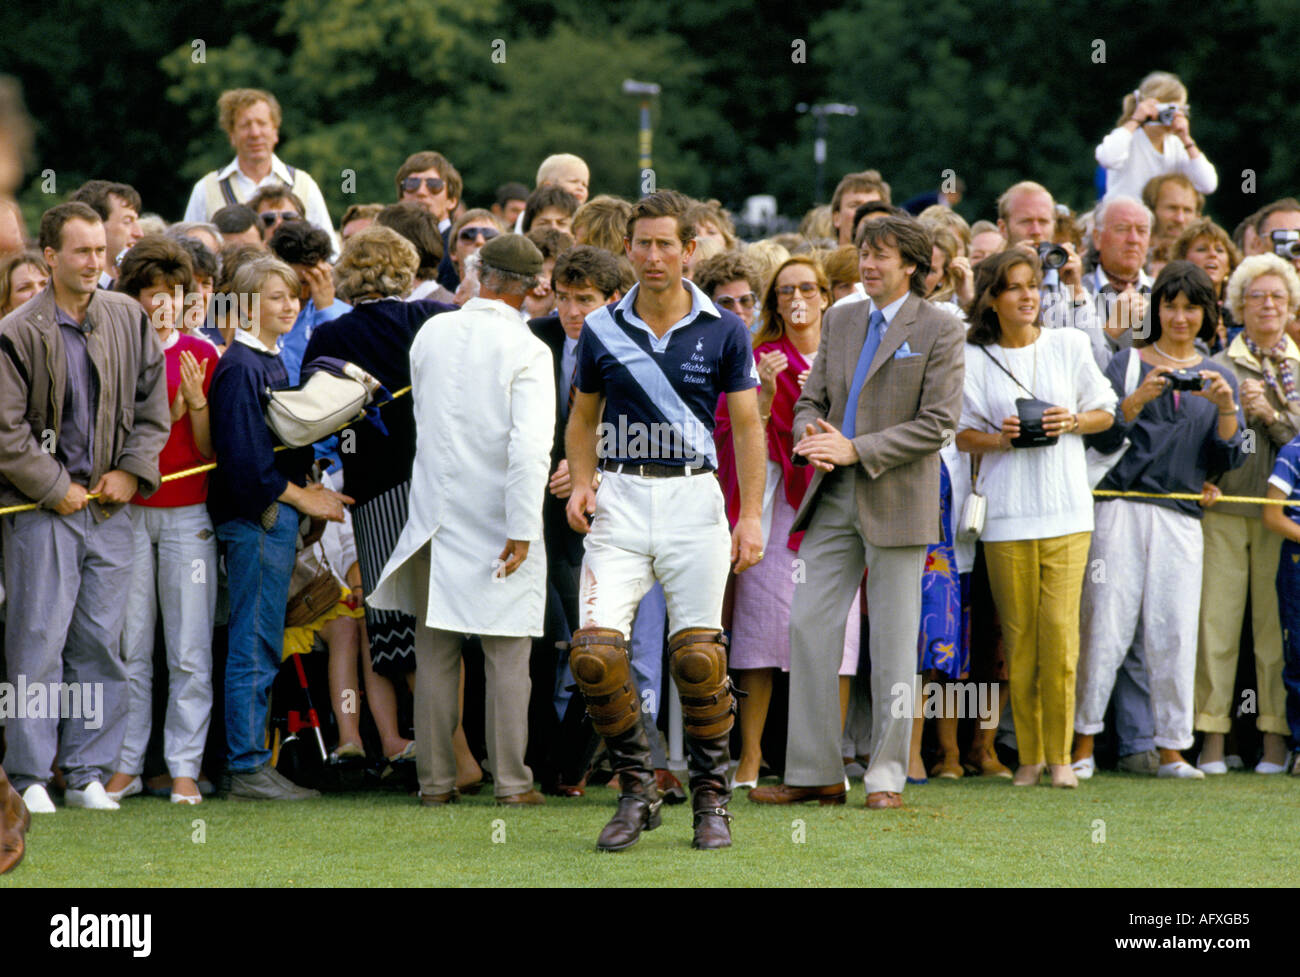 Guards Club Polo Ground Polo Windsor Great Park. Prince Charles goes to collect prize trophy, he was playing for Les Diables Bleus 1987 1980s UK Stock Photo